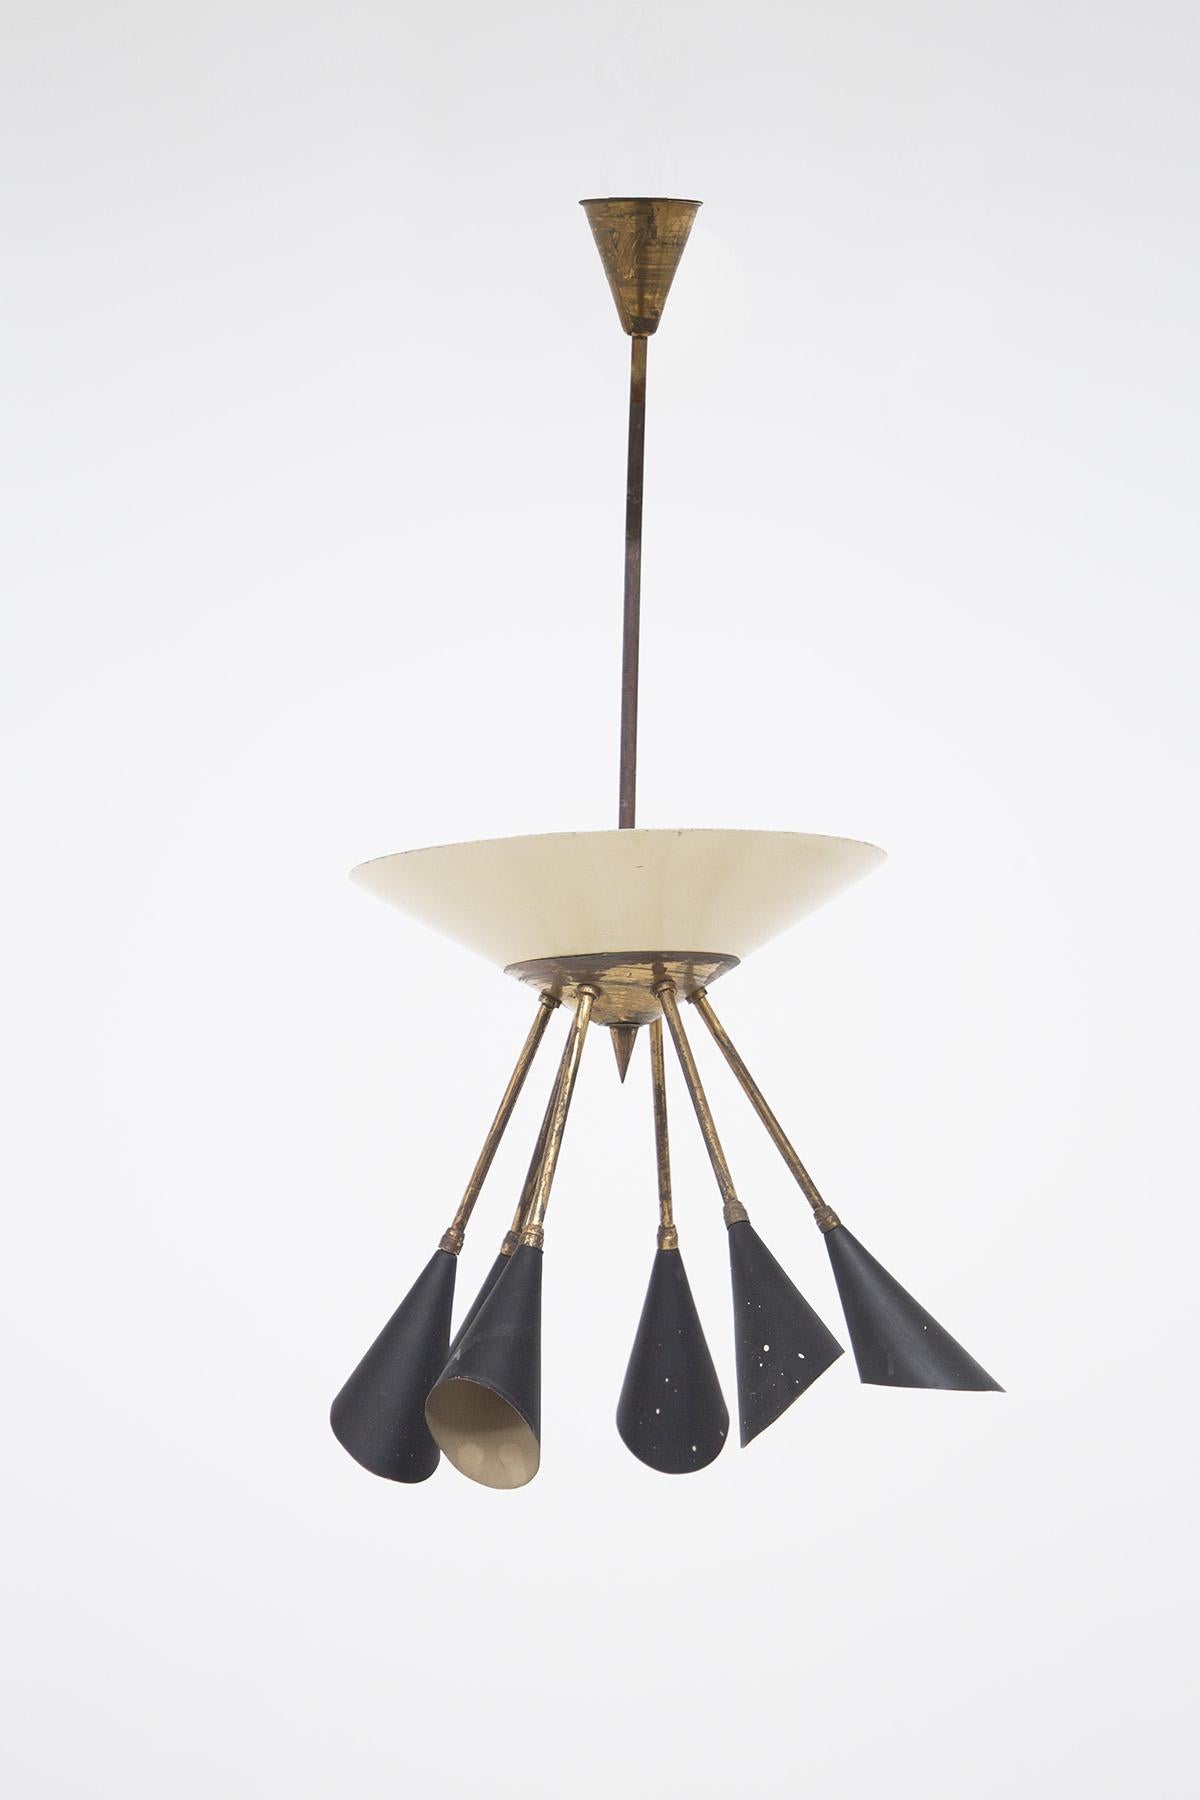 Vintage Italian-made chandelier from the 1950s. The chandelier is made with a patina brass frame. At the end of the brass stem we find an inverted pyramidal dome in white painted aluminum, its tip is finished in brass. From it we radiate six brass